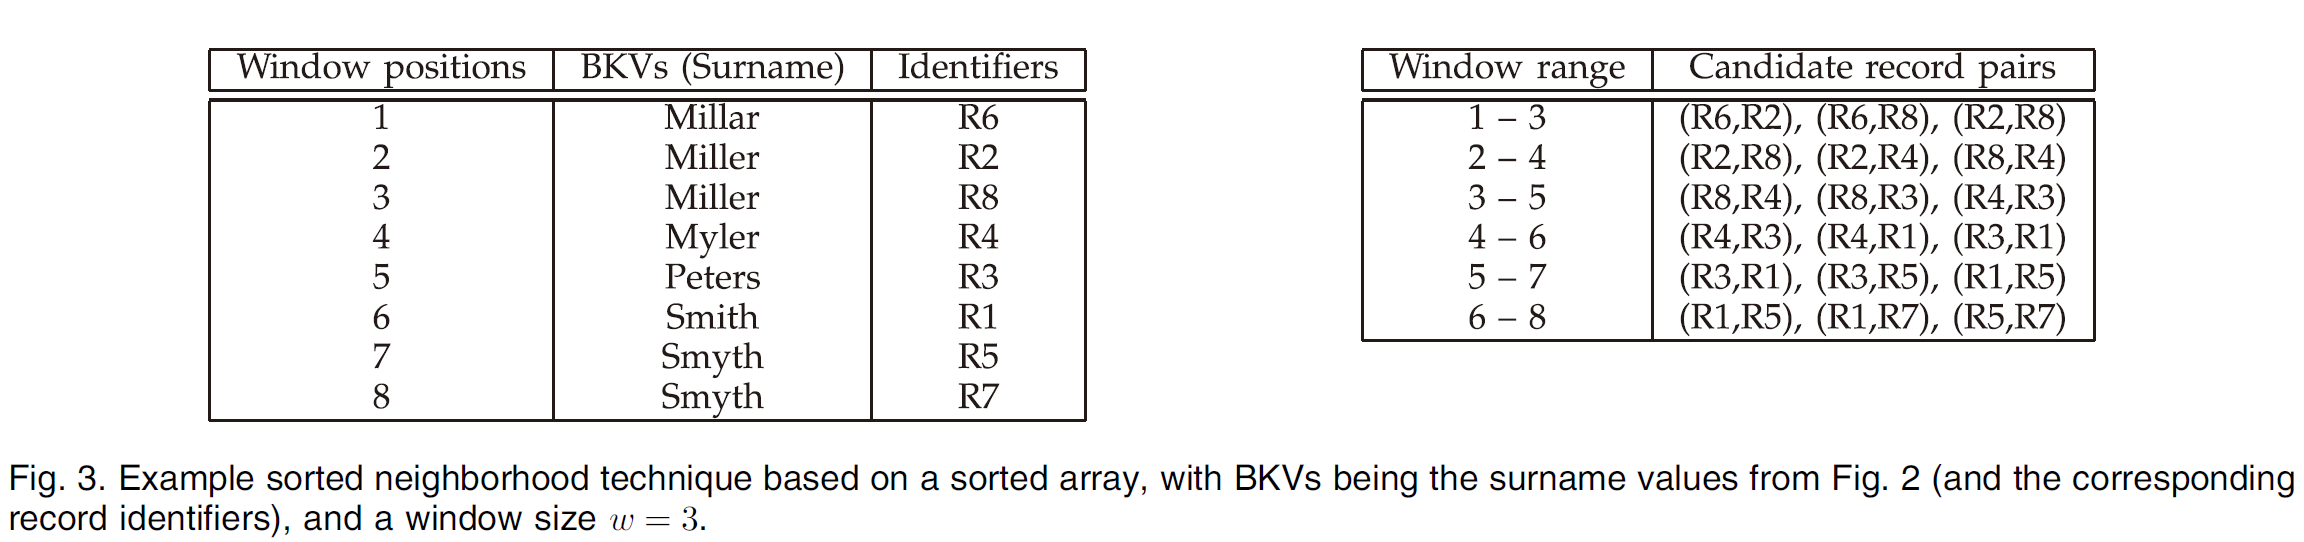 Sorted Array-Based Approach